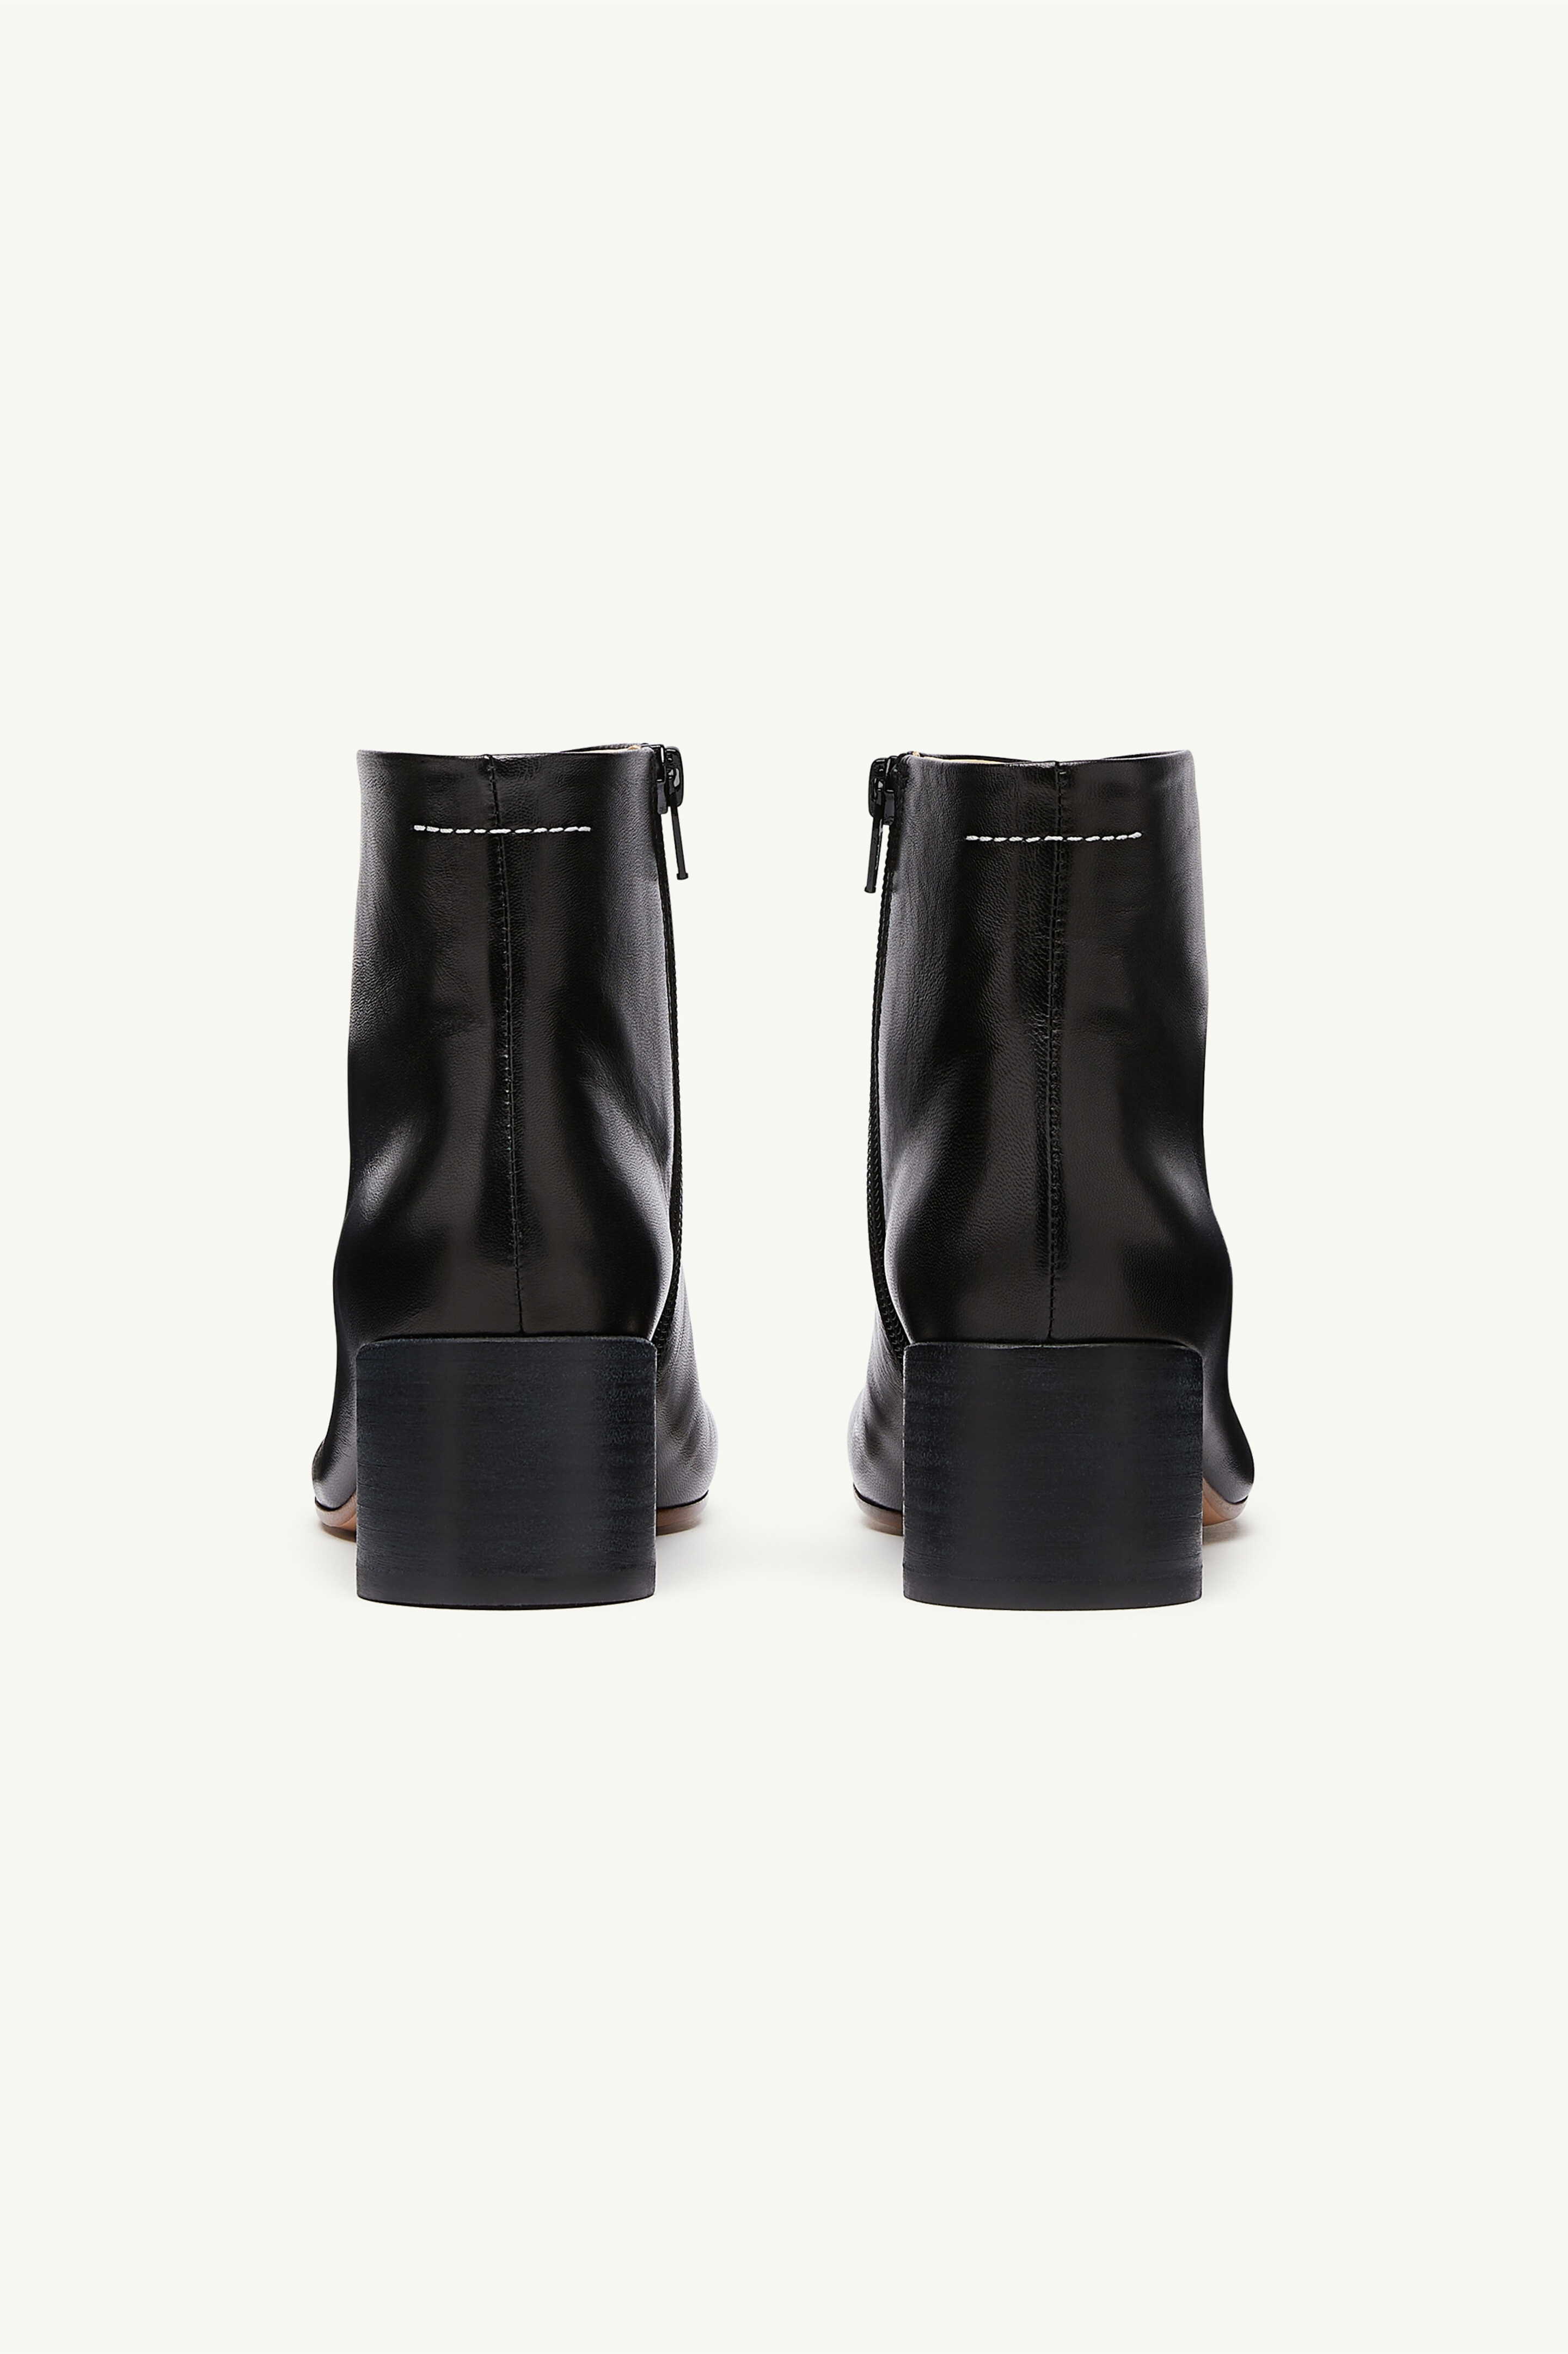 Anatomic classic ankle boots - 3